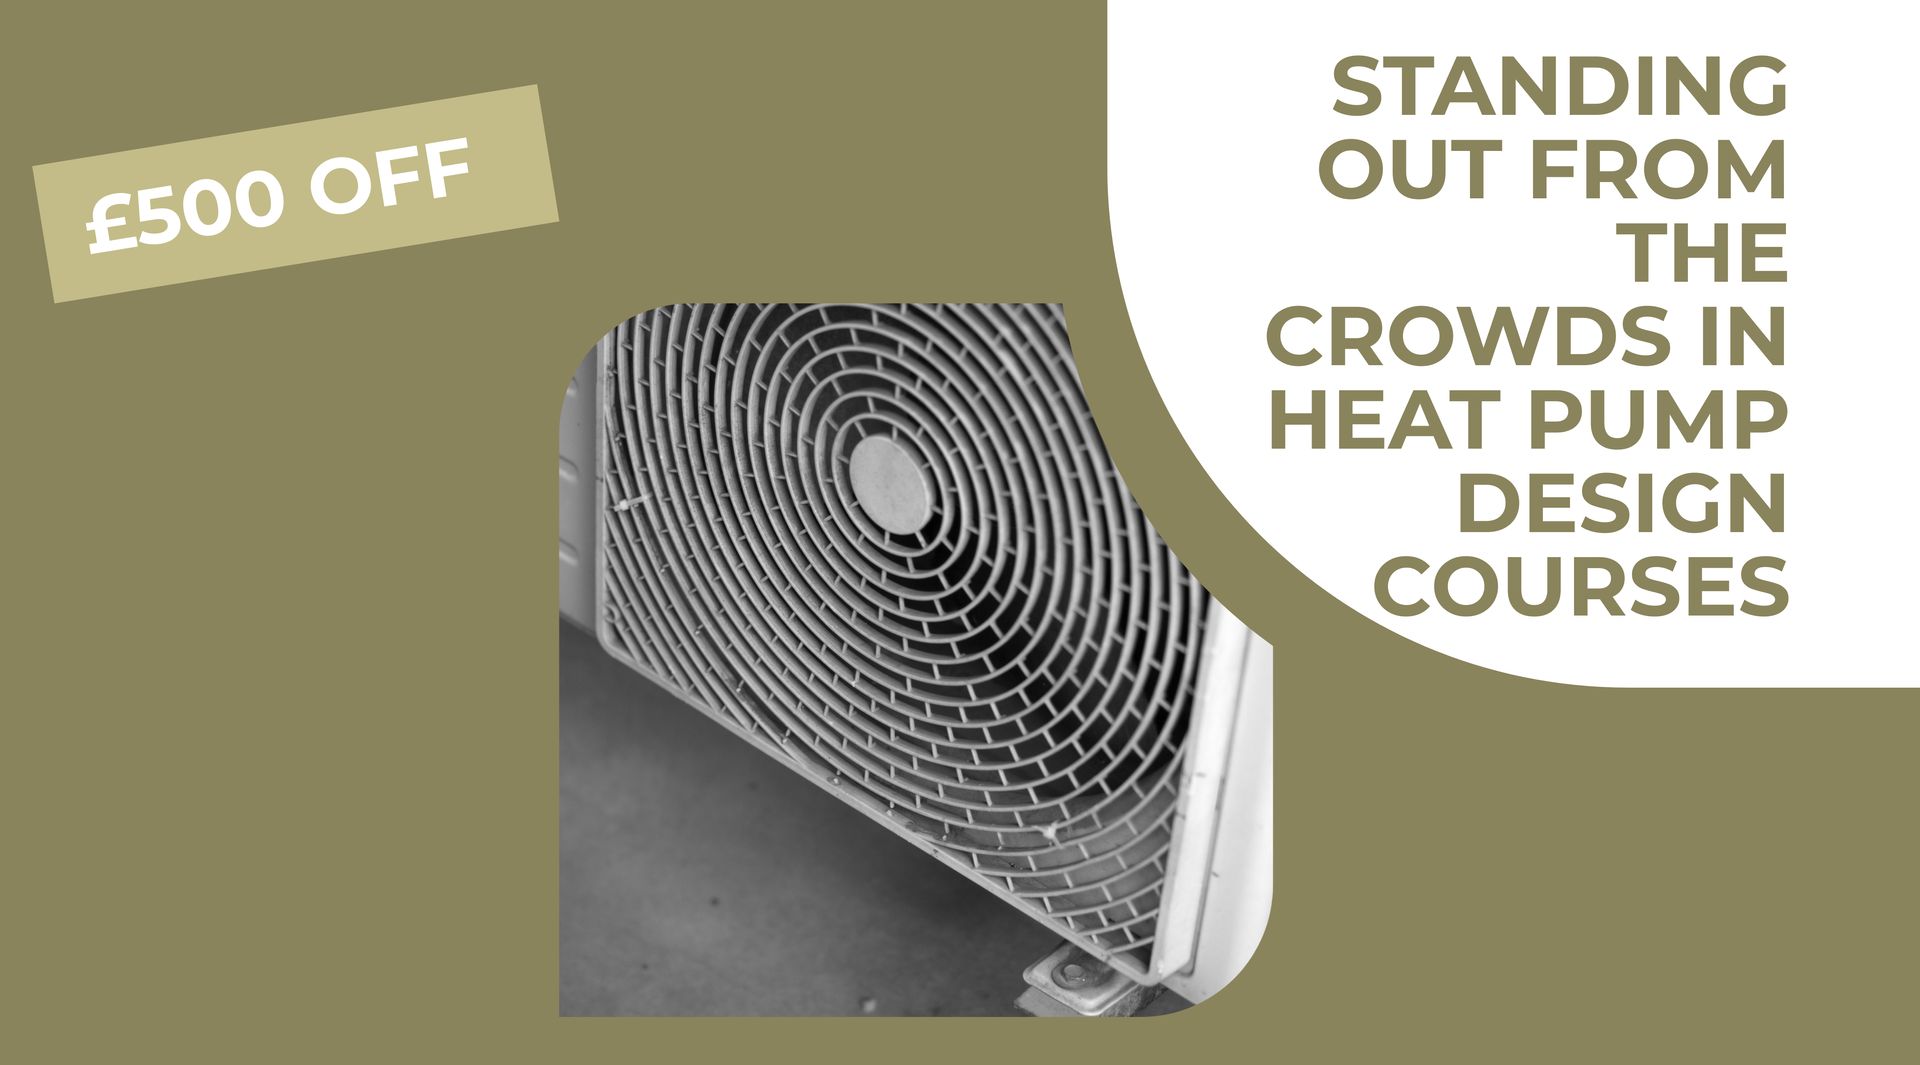 Standing out from the crowds in Heat Pump Design courses